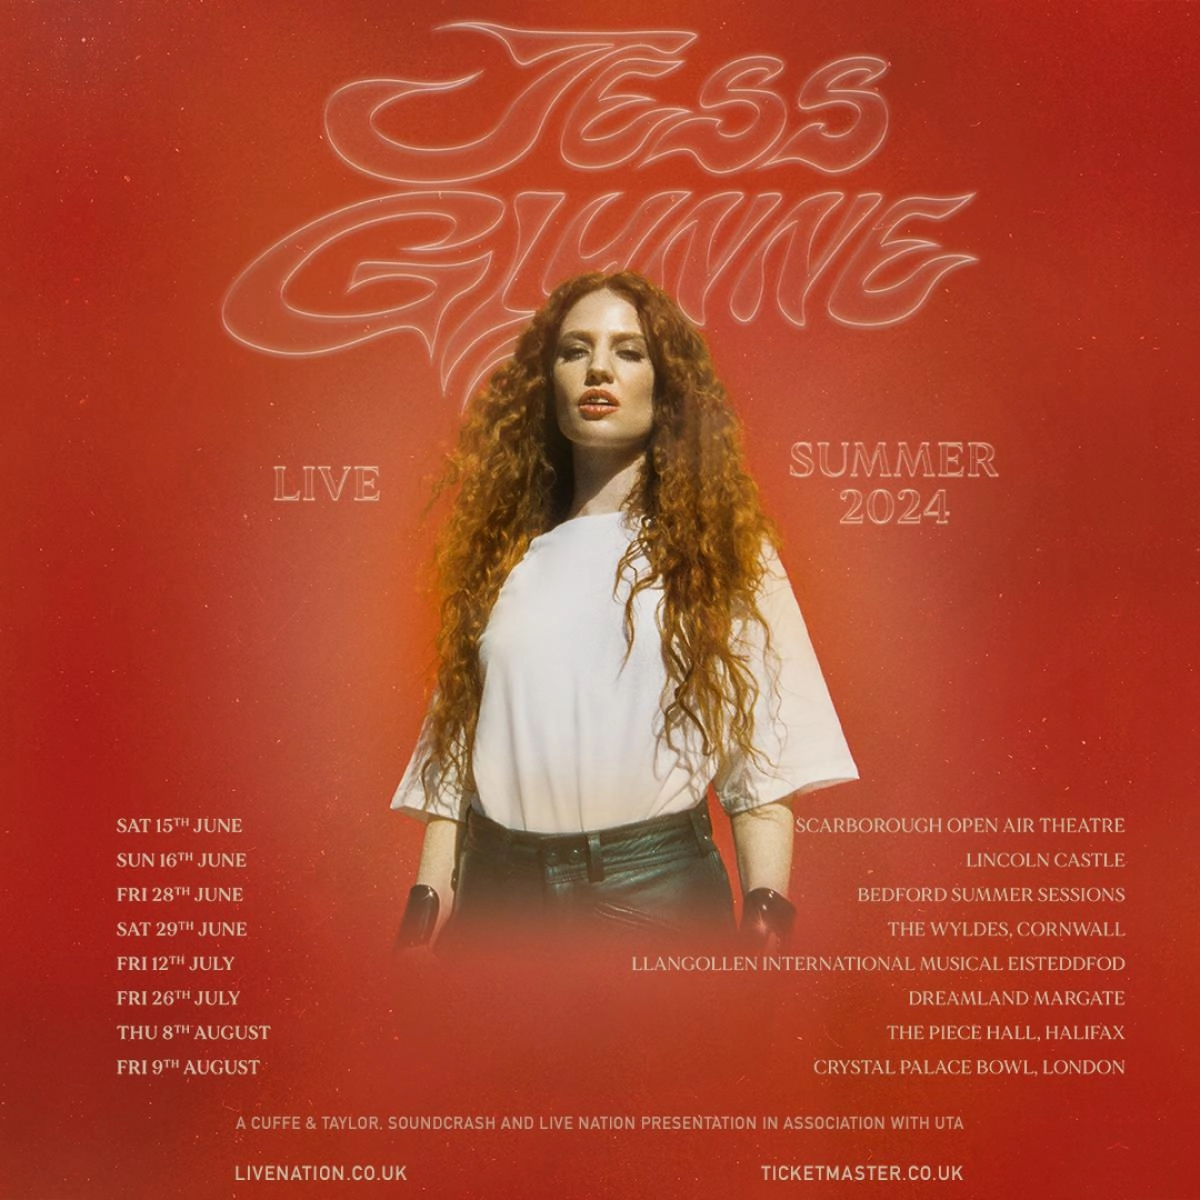 Jess Glynne at Scarborough Open Air Theatre Tickets